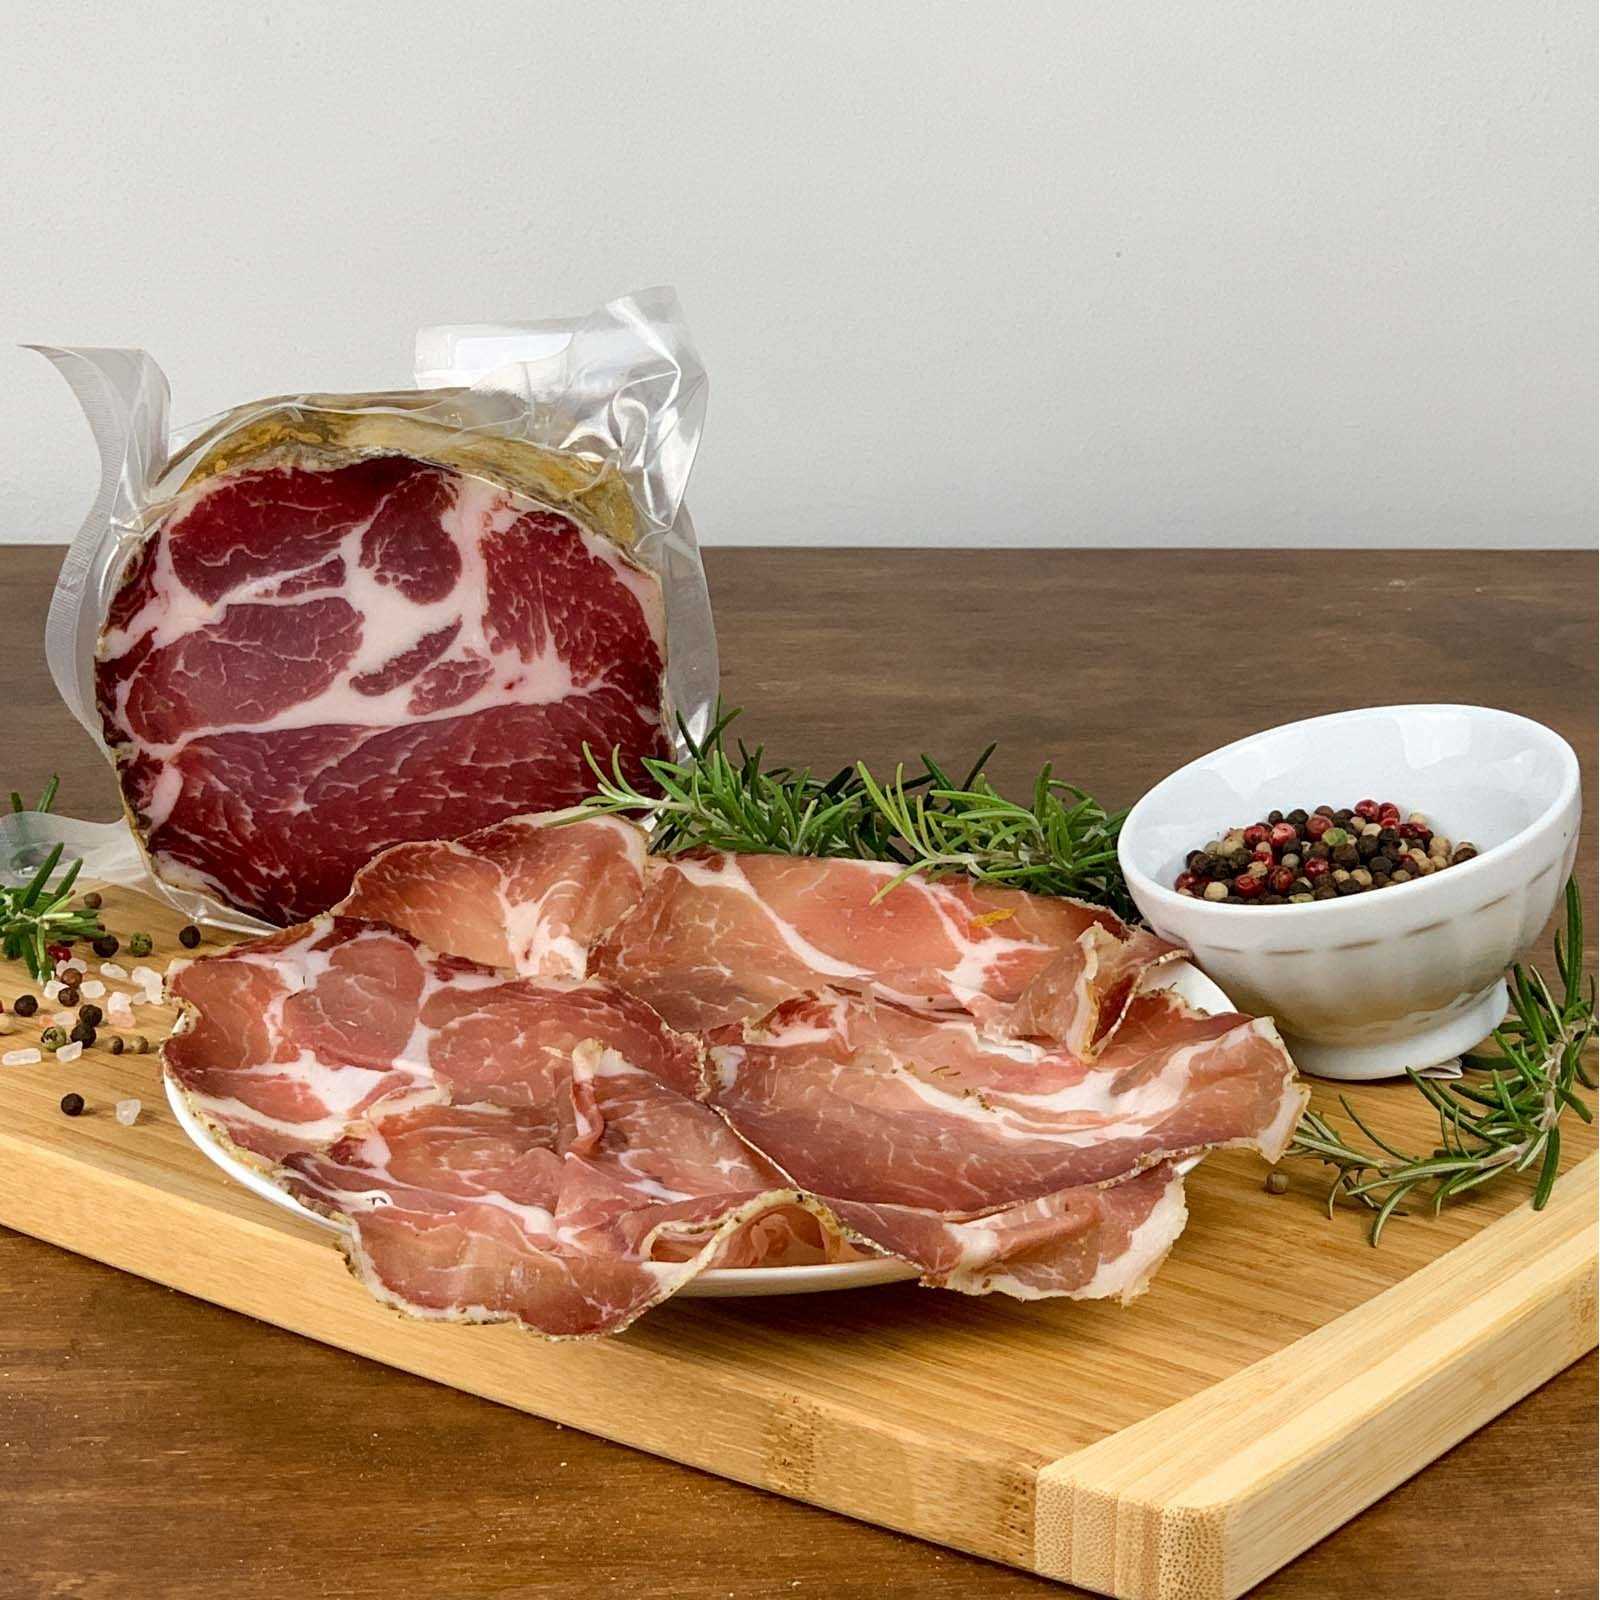 Tuscan Capocollo, also known by the name of Coppa, is a seasoned salami that derives from the artisanal processing of first choice national pork, carried out in compliance with ancient traditional techniques. It is characterized by a sweet and spicy taste, while its scent recalls the hint of spices and aromatic herbs.